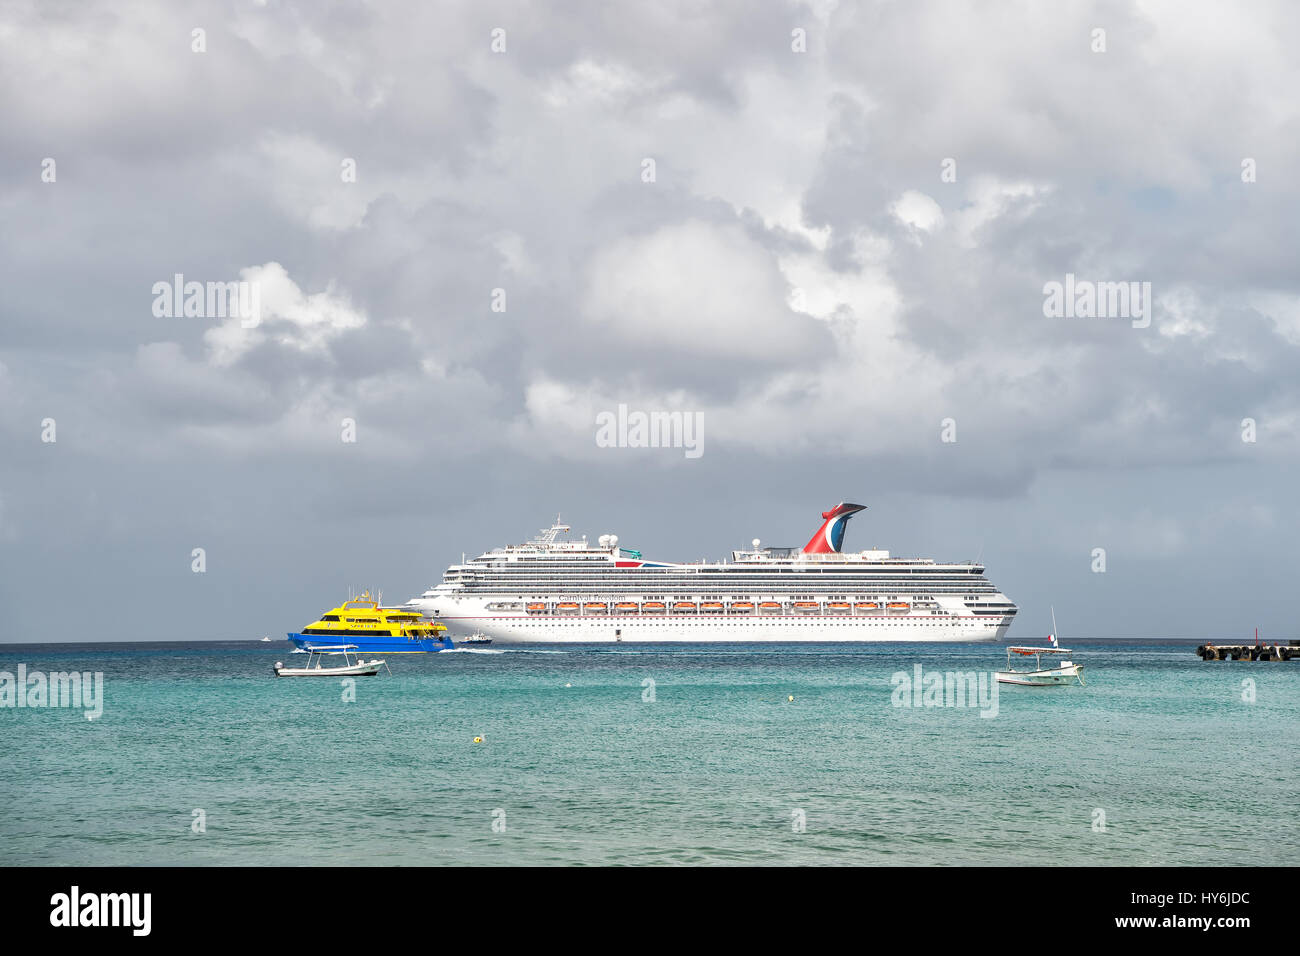 Cozumel, Mexico - December 24, 2015: large cruise ship or liner in bay or harbor, touristic passenger boat on water summer day on cloudy sky backgroun Stock Photo